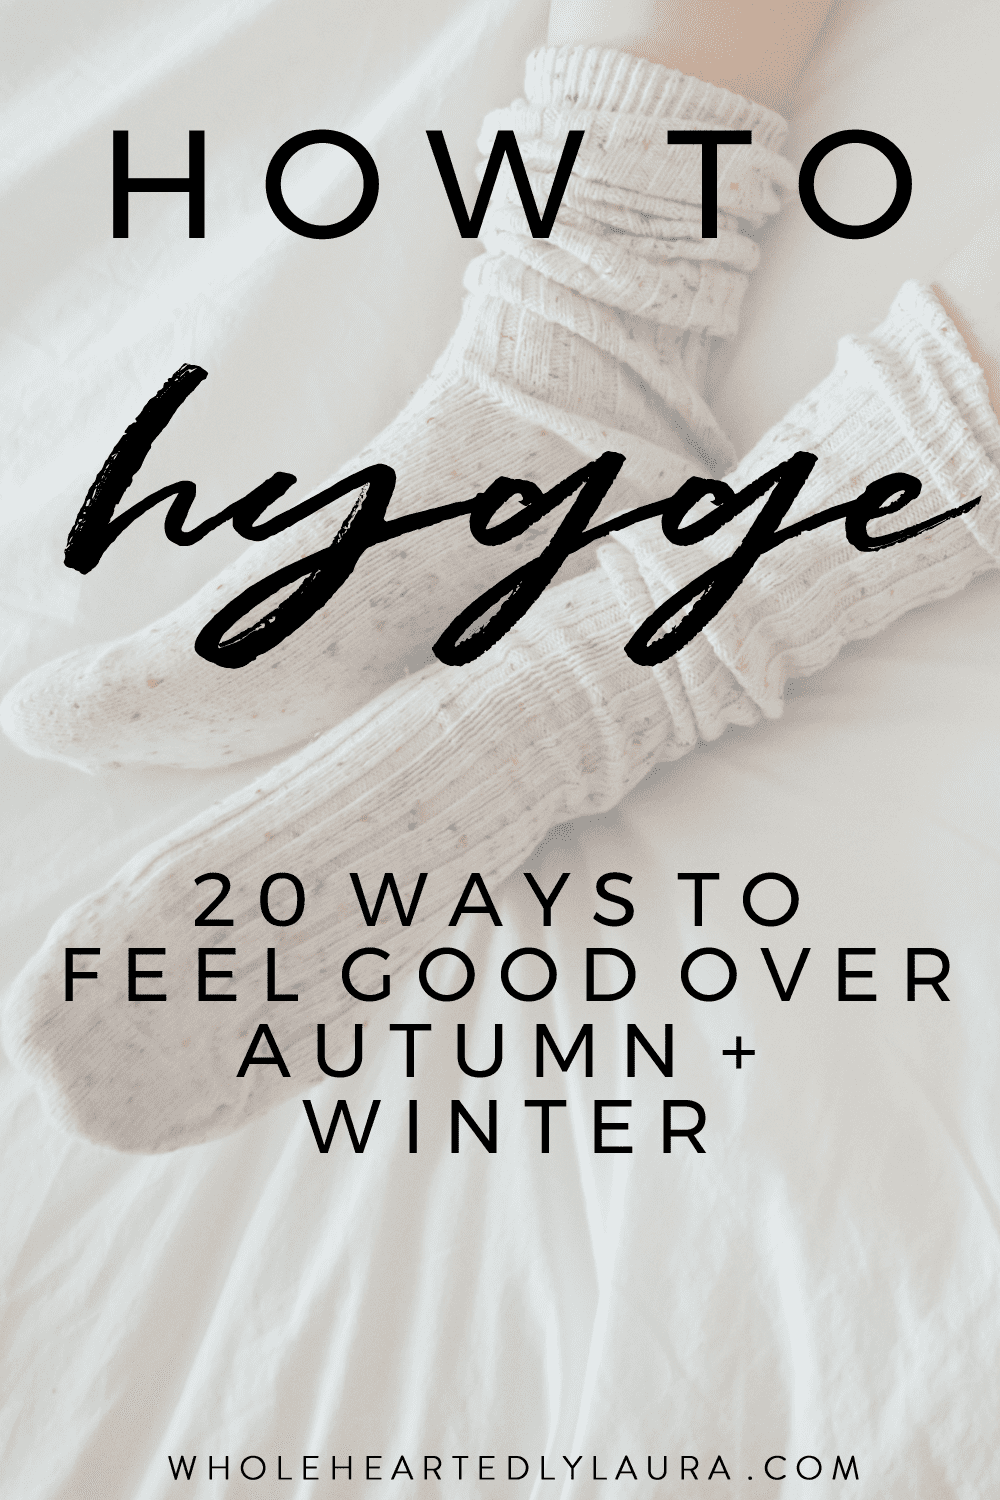 How to Hygge - Wholeheartedly Laura